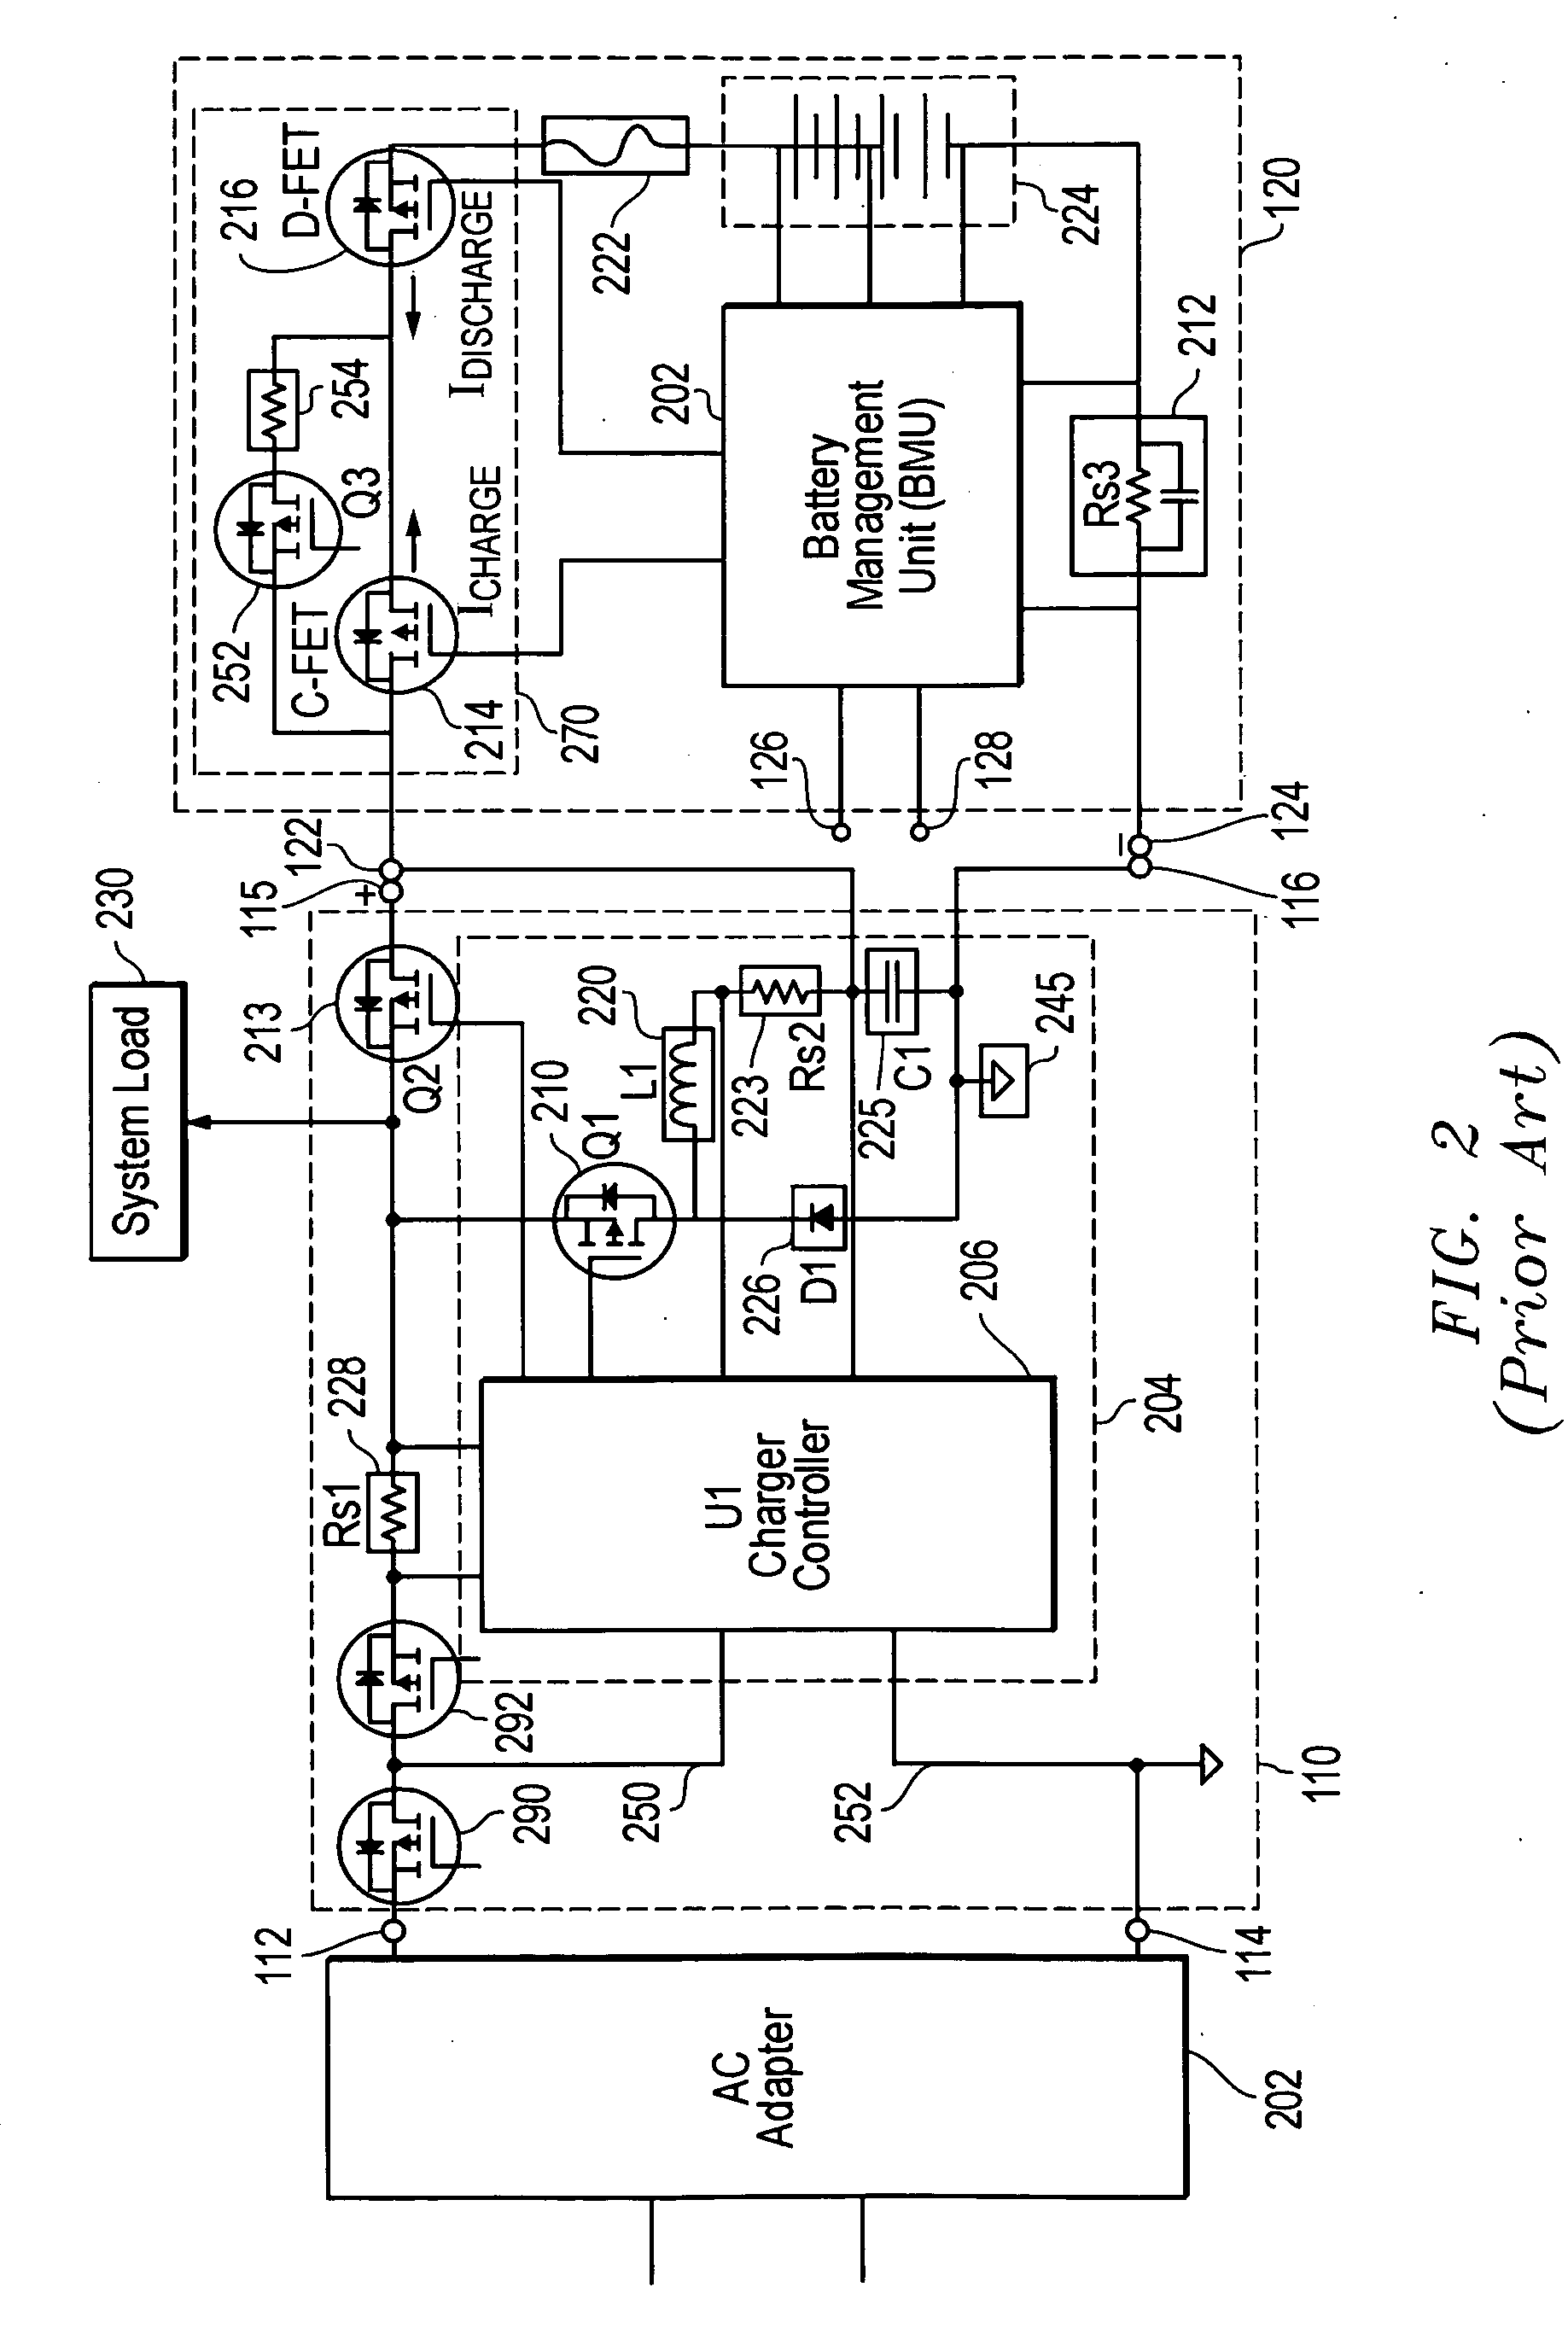 Systems and methods for integration of charger regulation within a battery system